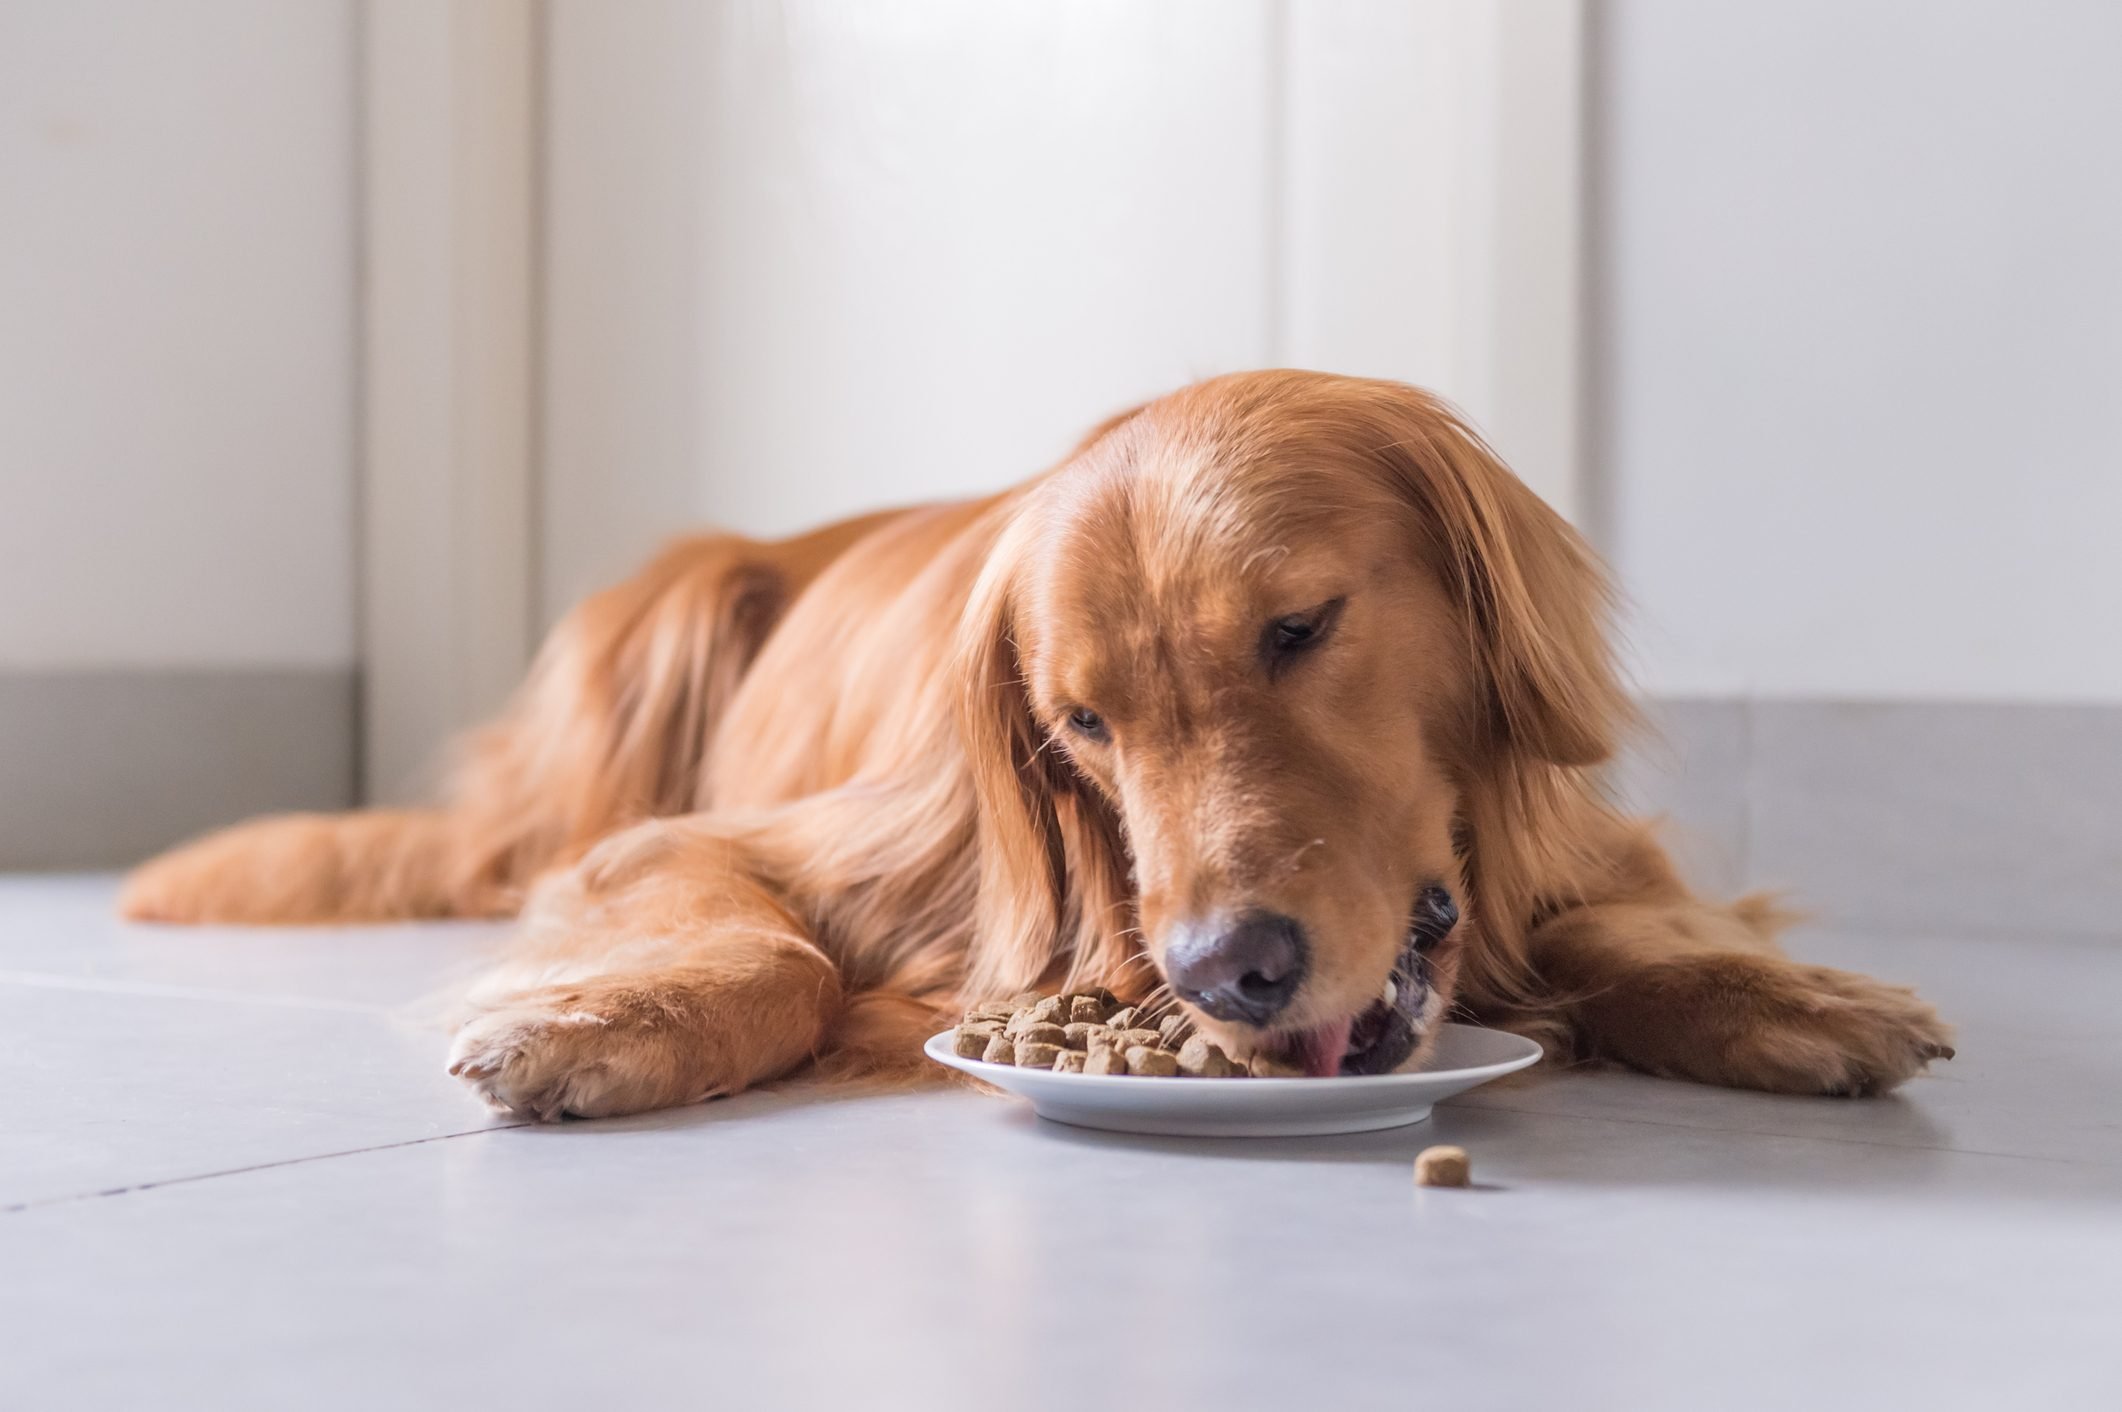 Redford Naturals Dog Food: The Healthy Choice for Your Four-Legged Friend